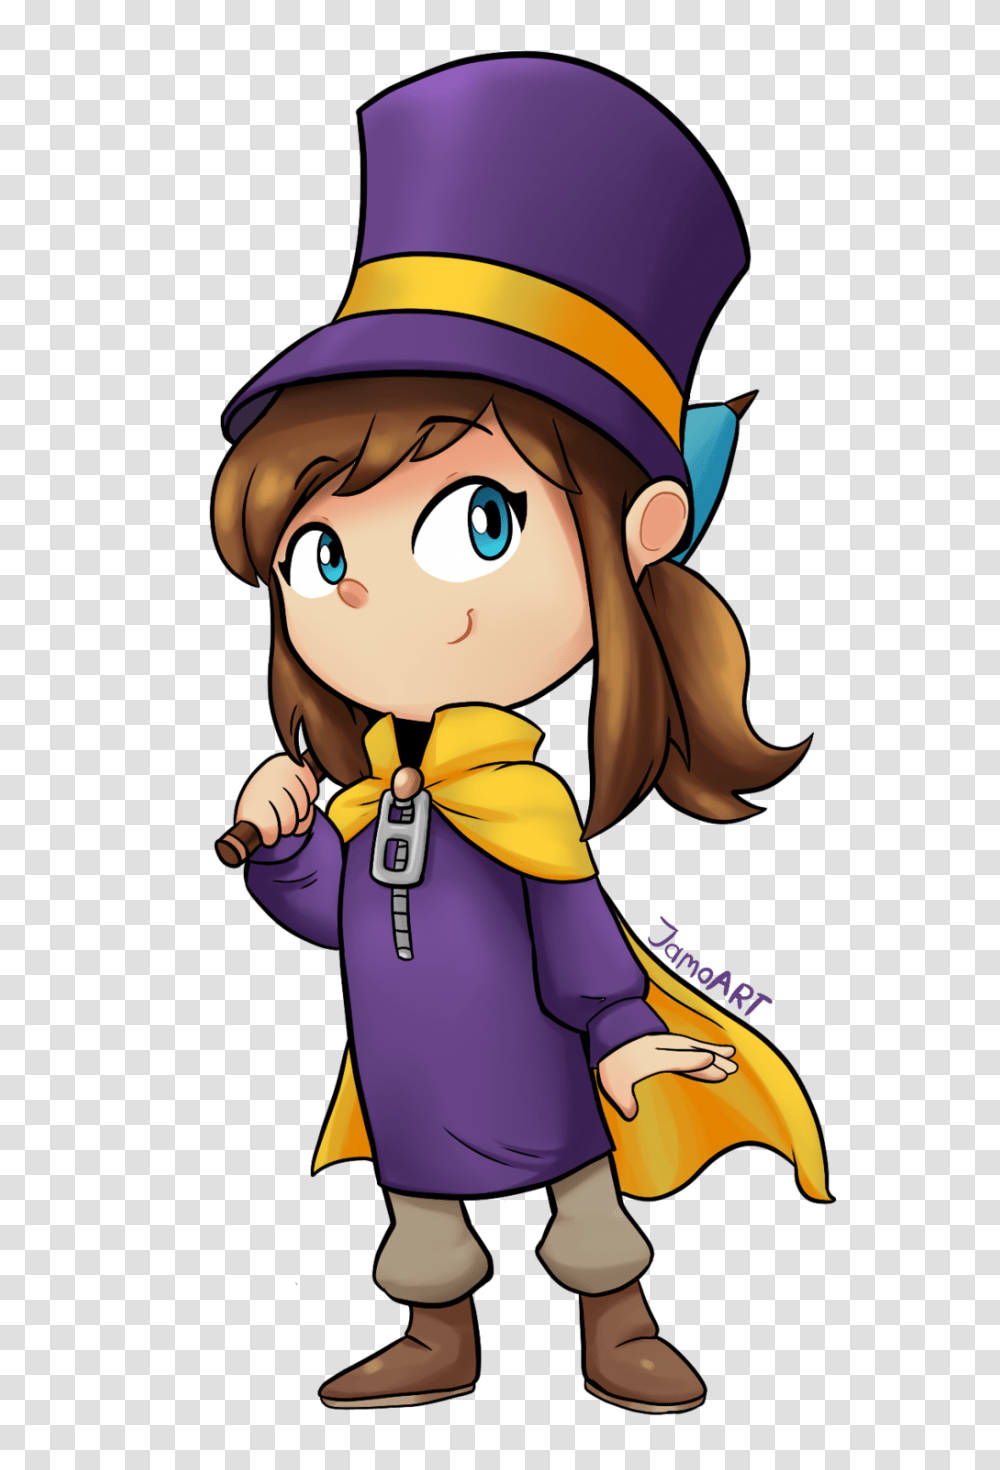 Hat Kid The Mystery Kids Wiki Fandom Powered, Apparel, Toy, Doll Transparent Png